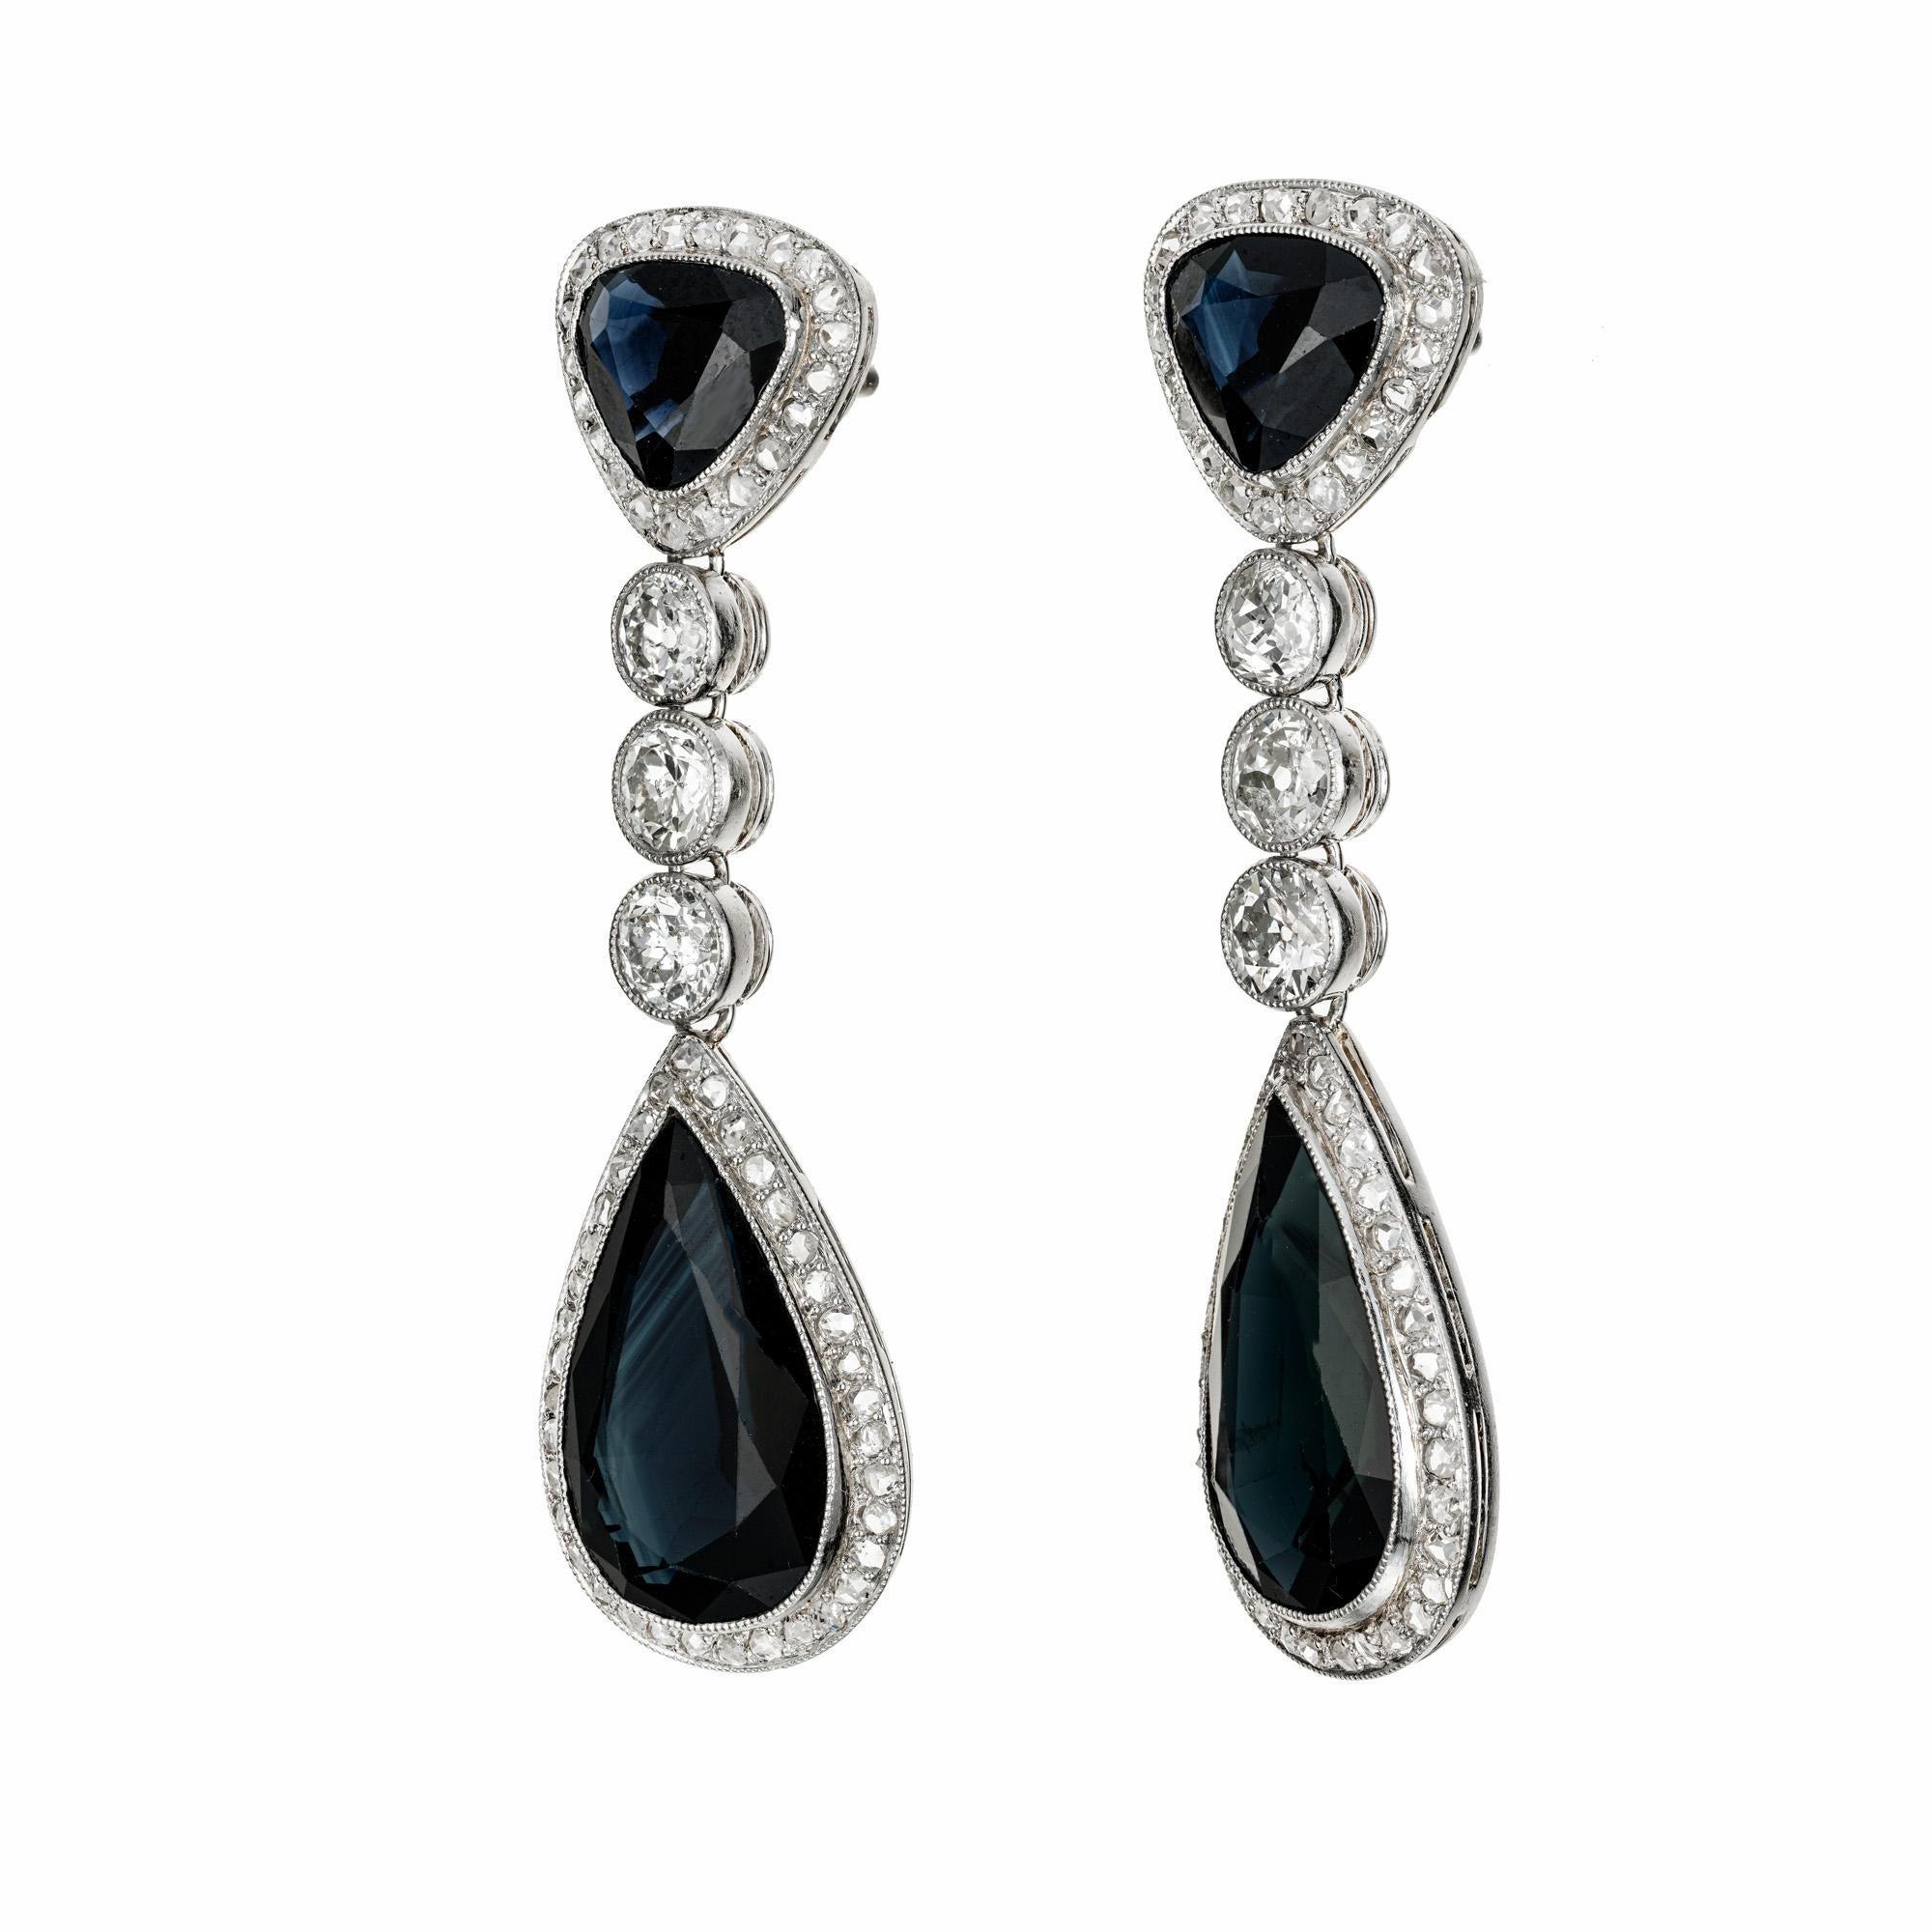 1915 Dramatic sapphire and diamond dangle drop earrings. 2 triangular shaped sapphires each with a halo of diamonds. 2 pear shaped sapphires each with a halo of diamonds hanging from a row of three old mind cut diamonds. The settings are original